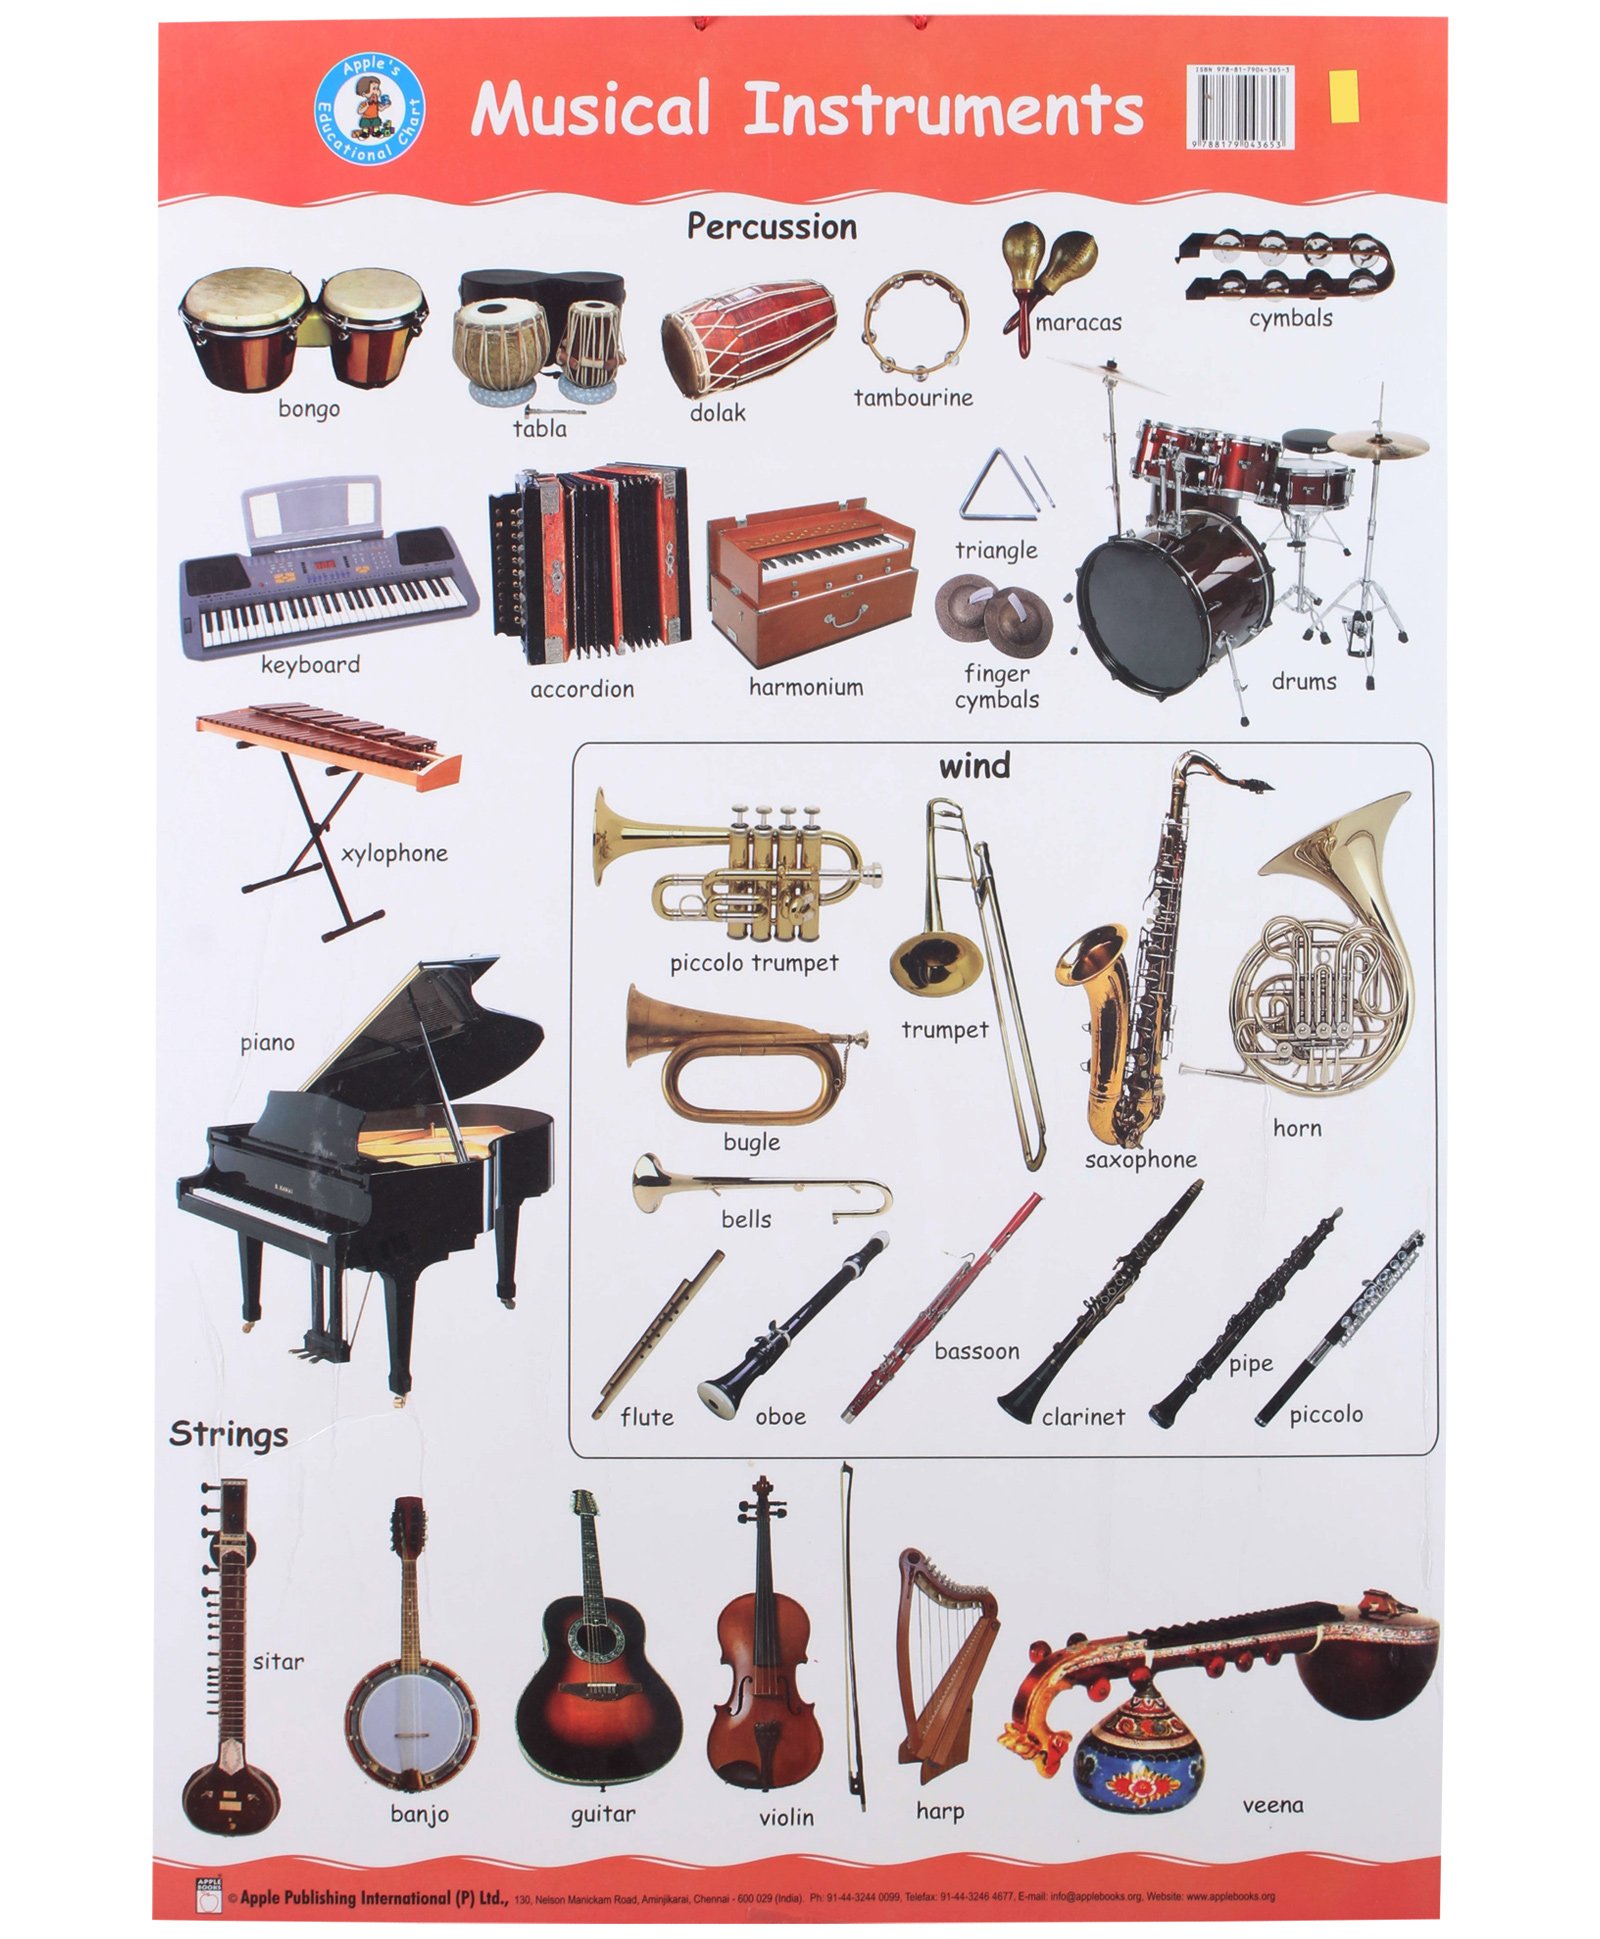 types of musical instruments - Clip Art Library